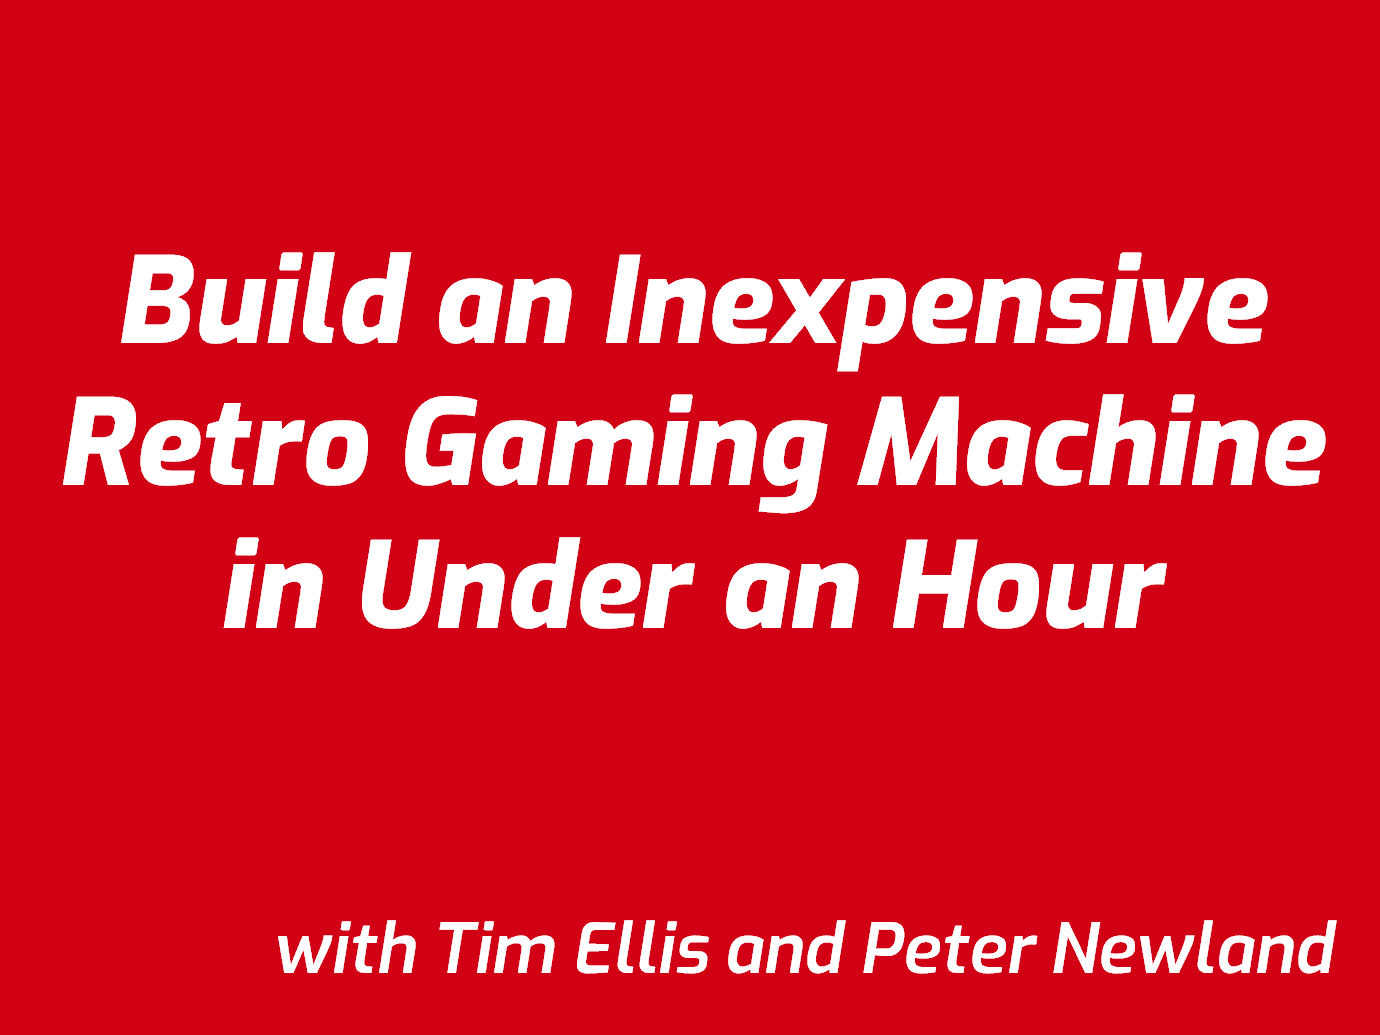 PAX West 2018: Build an Inexpensive Retro Gaming Machine in Under an Hour